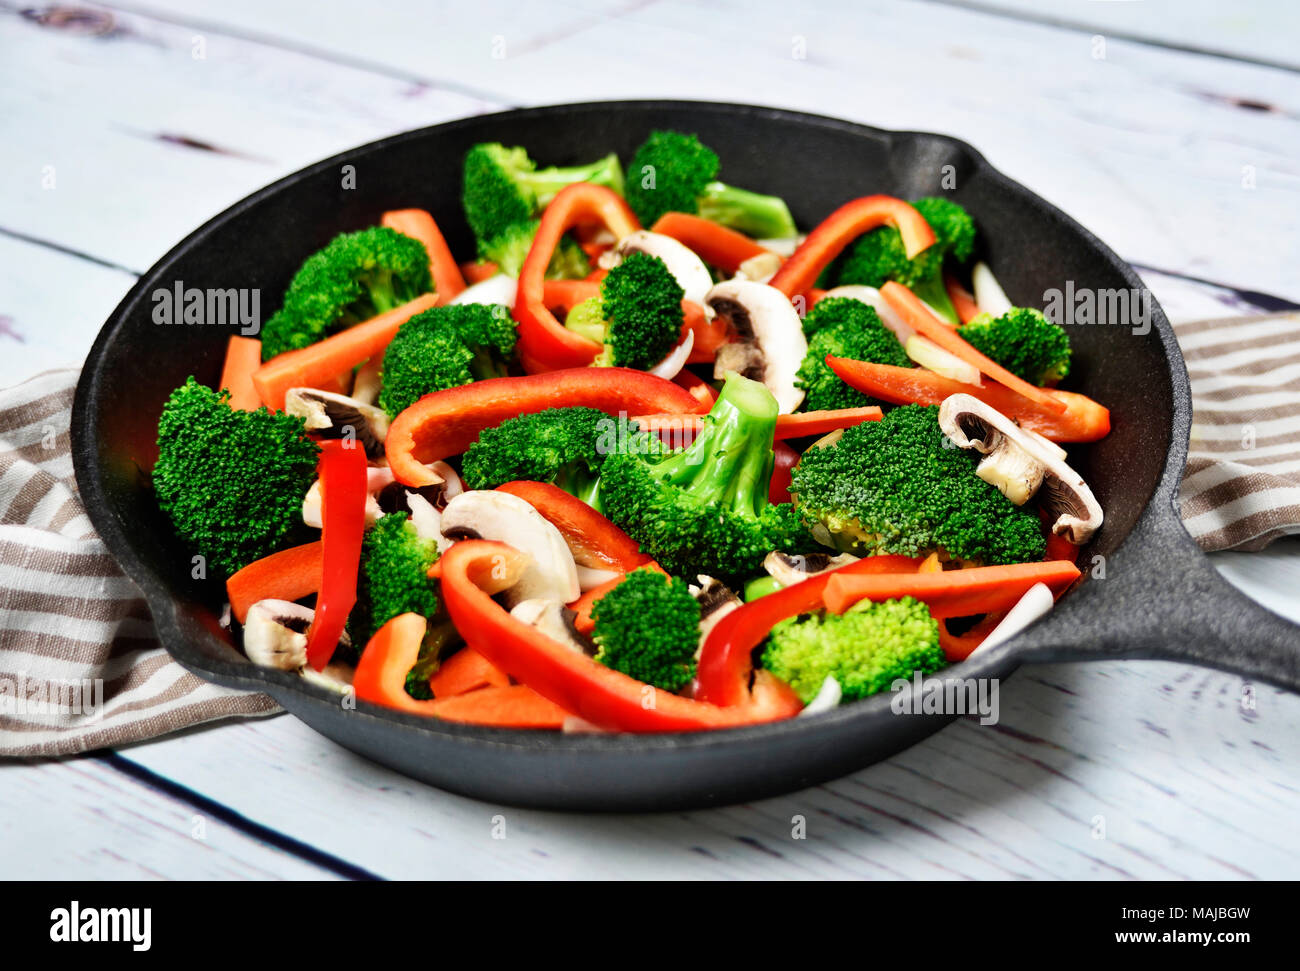 Healthy eating scene with vegetables in an iron pan or cooking pan. Broccoli, red bell pepper, carrots and white mushrooms. Stock Photo